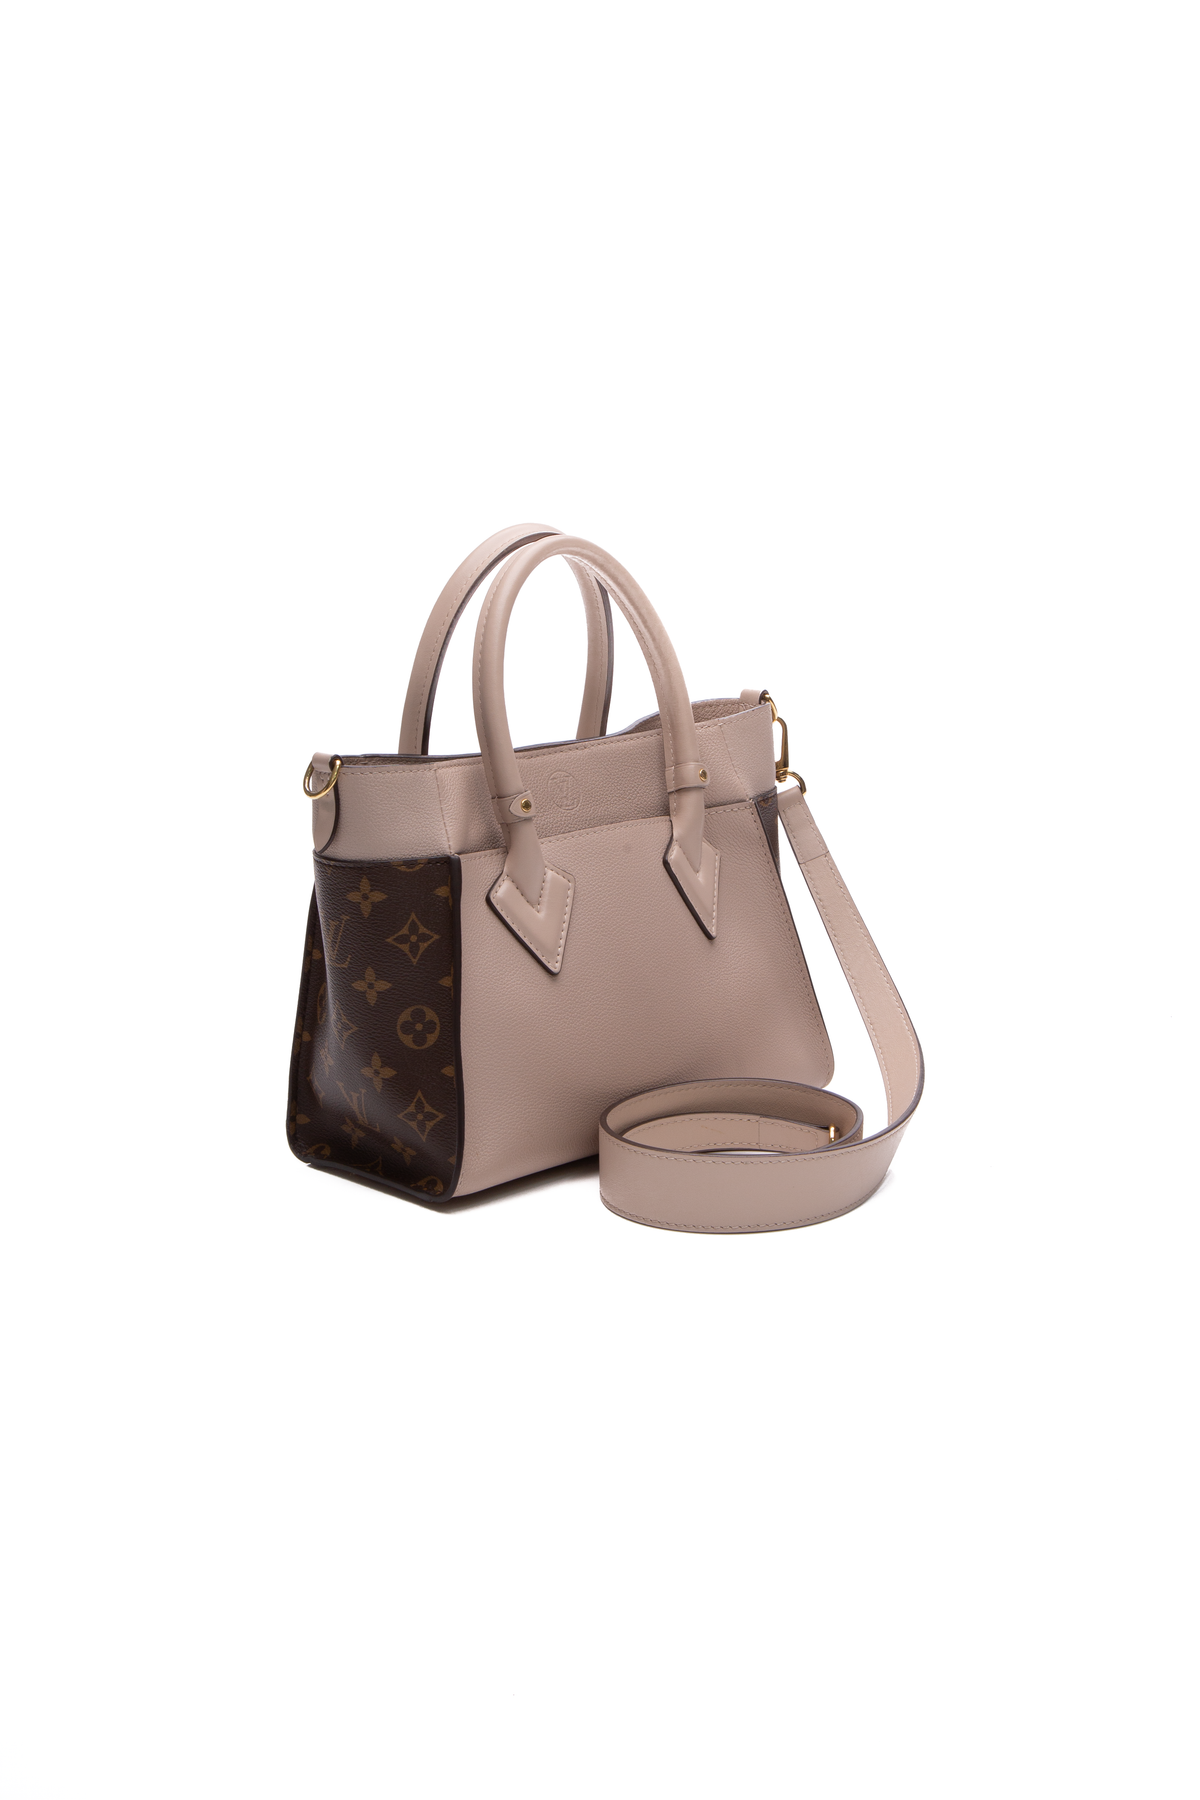 On My Side PM High End Leathers - Women - Handbags